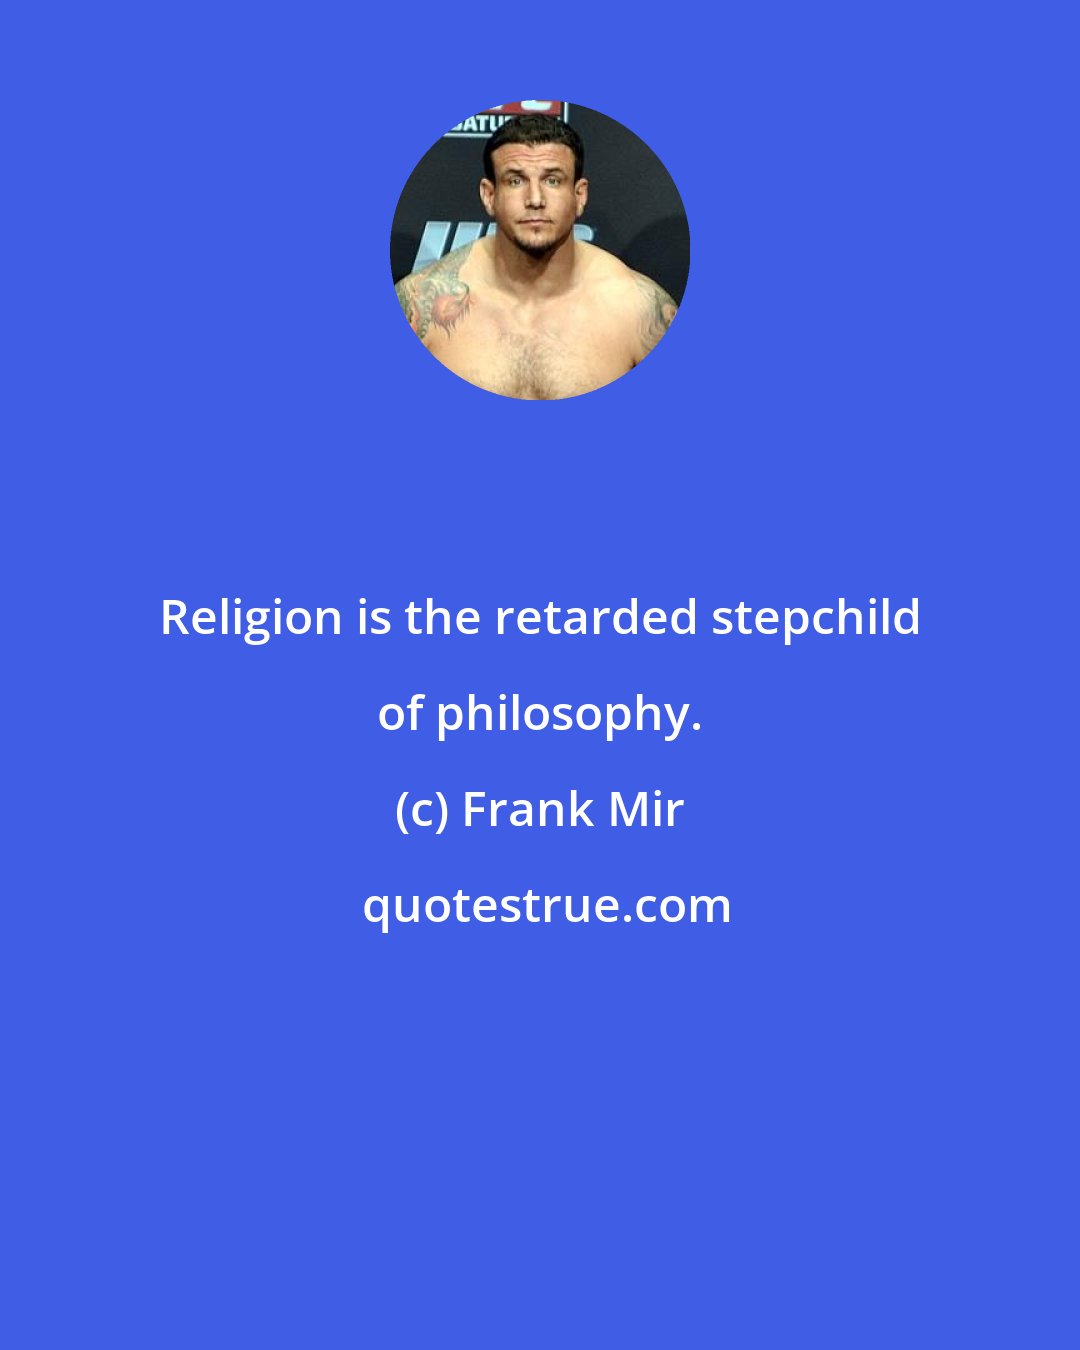 Frank Mir: Religion is the retarded stepchild of philosophy.